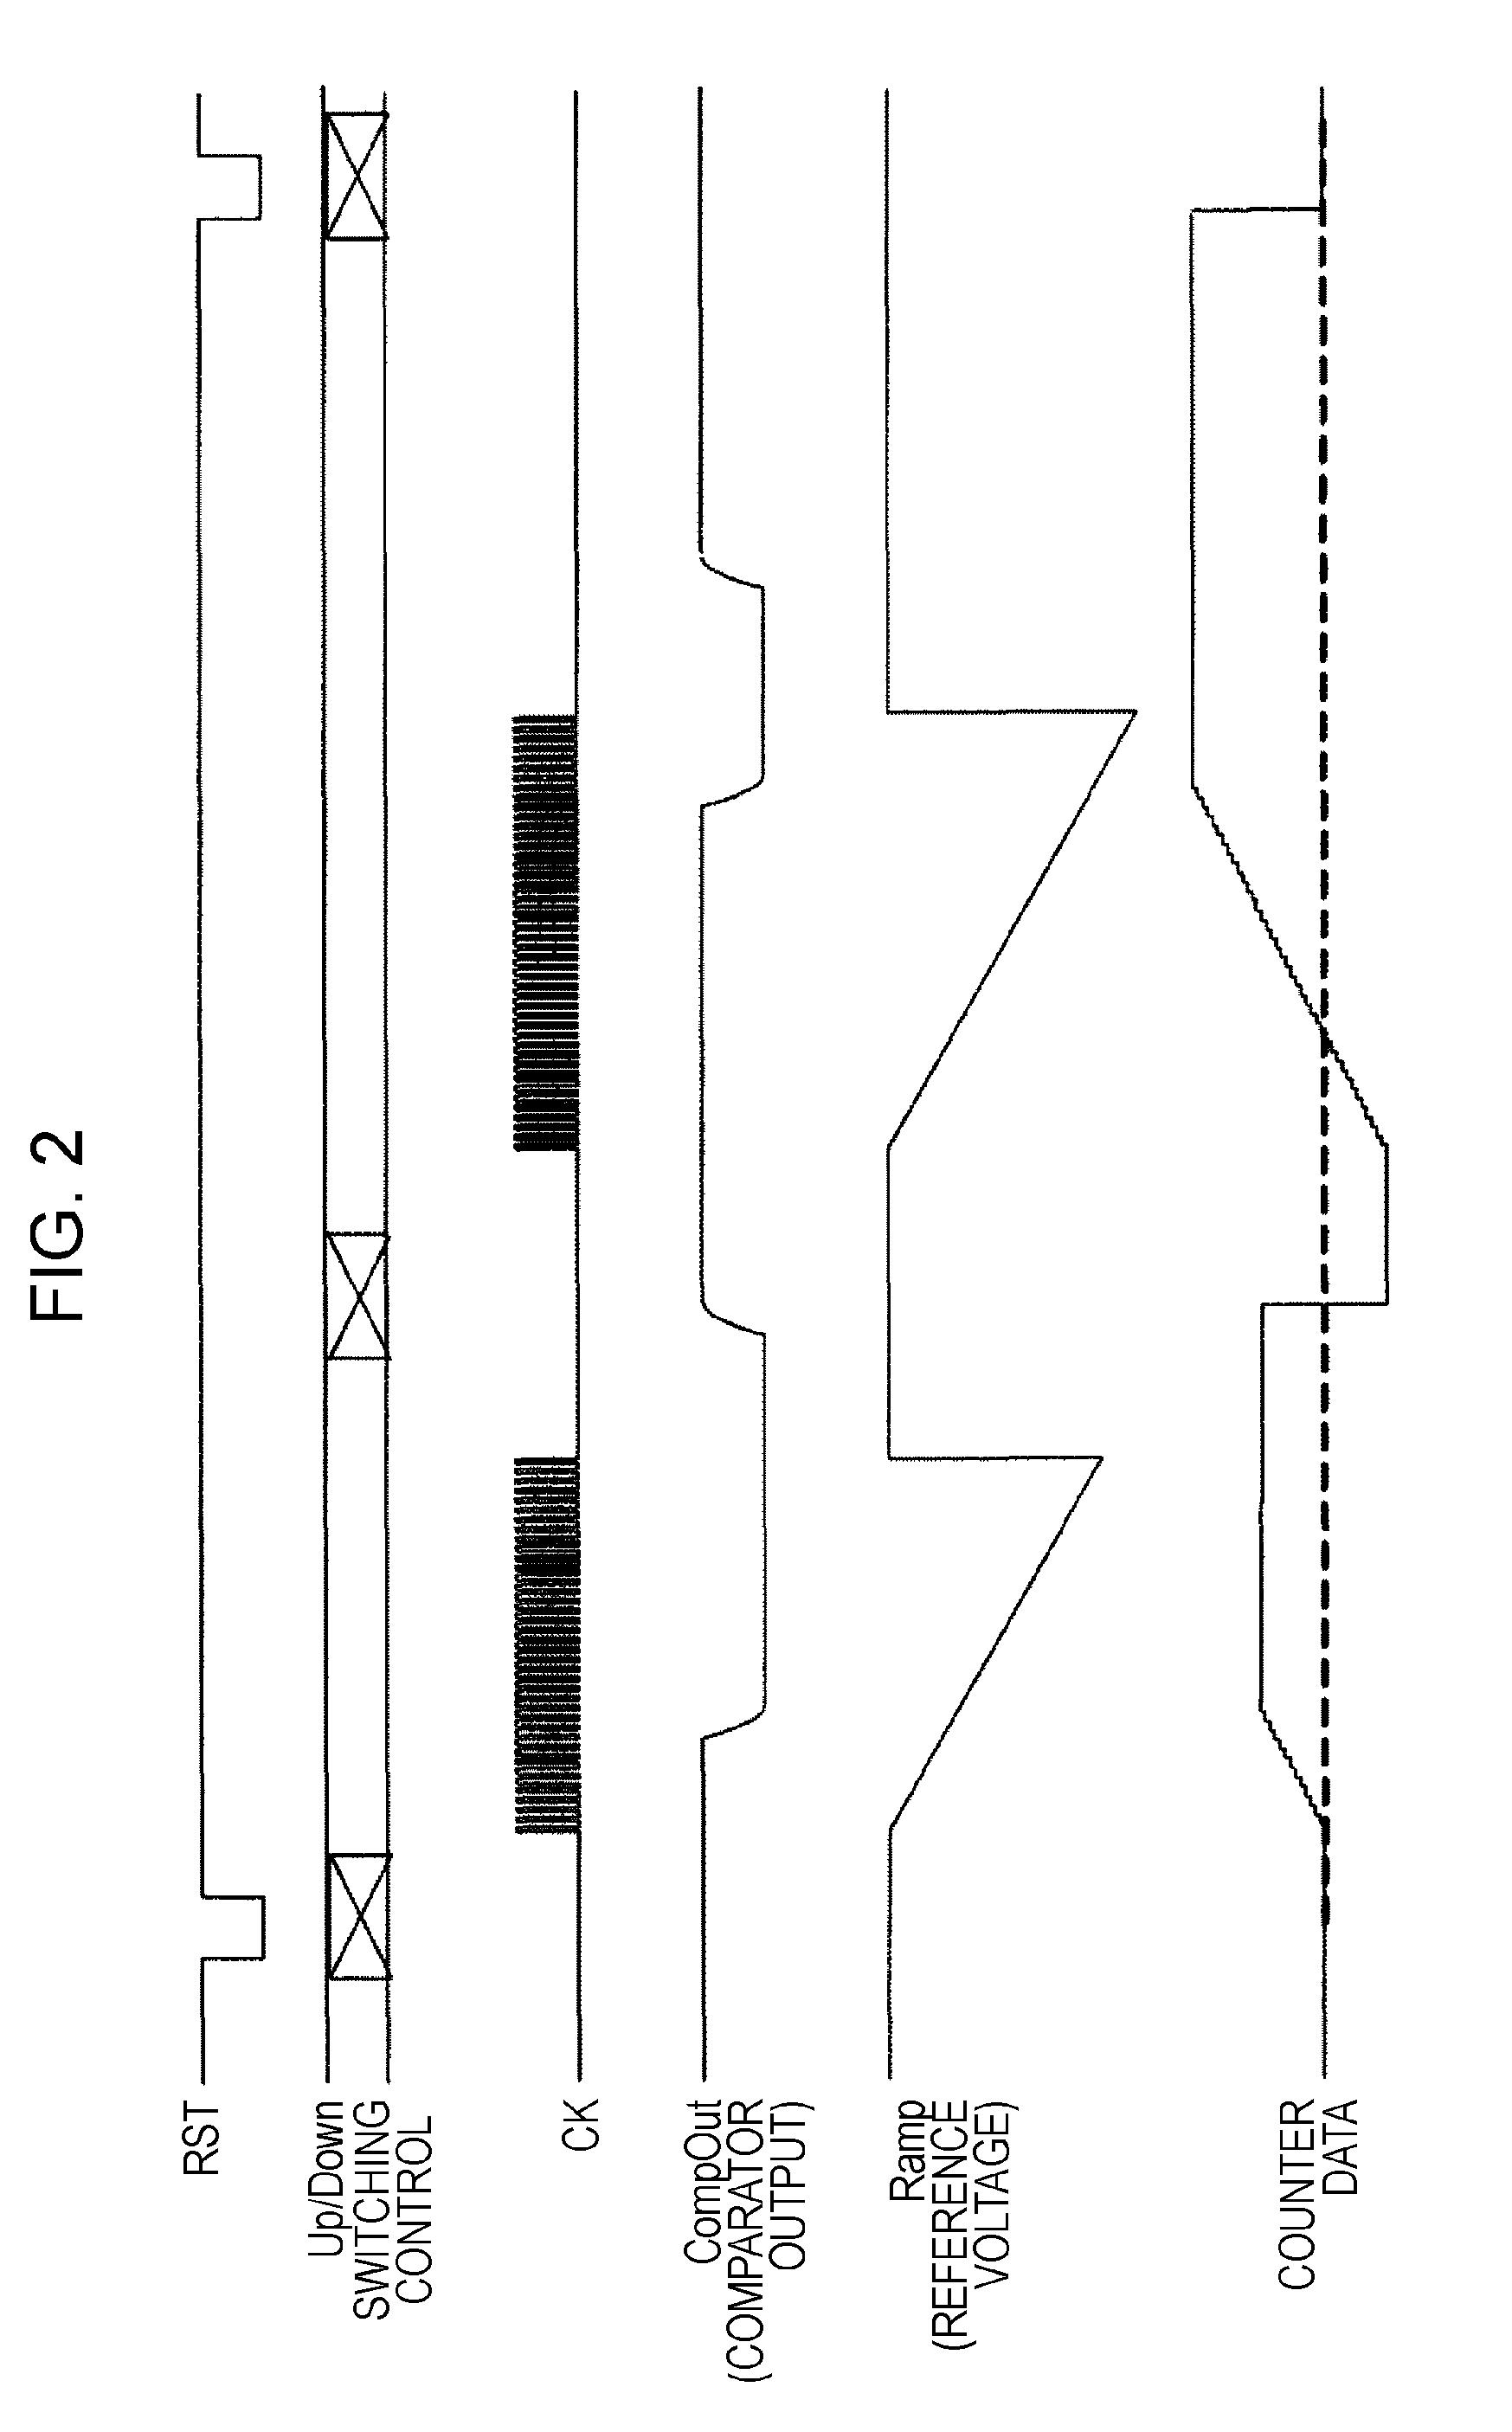 A/d conversion circuit, solid-state image sensor, and camera system